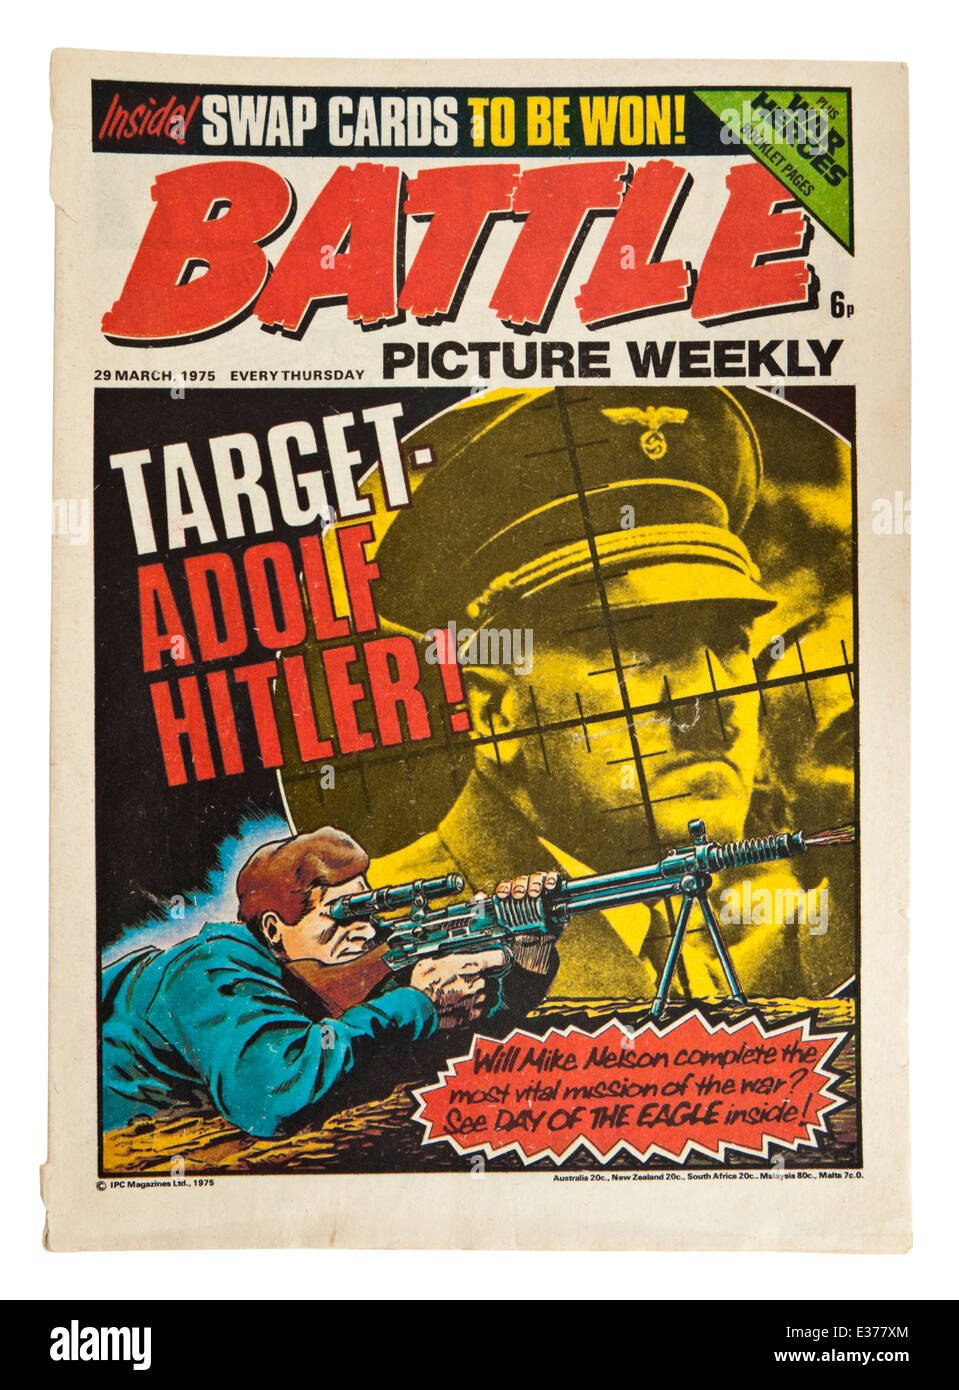 Issue No 4 of 'Battle' (29 March 1975), the popular British comic from the 1970's, with Adolf Hitler on the front cover Stock Photo